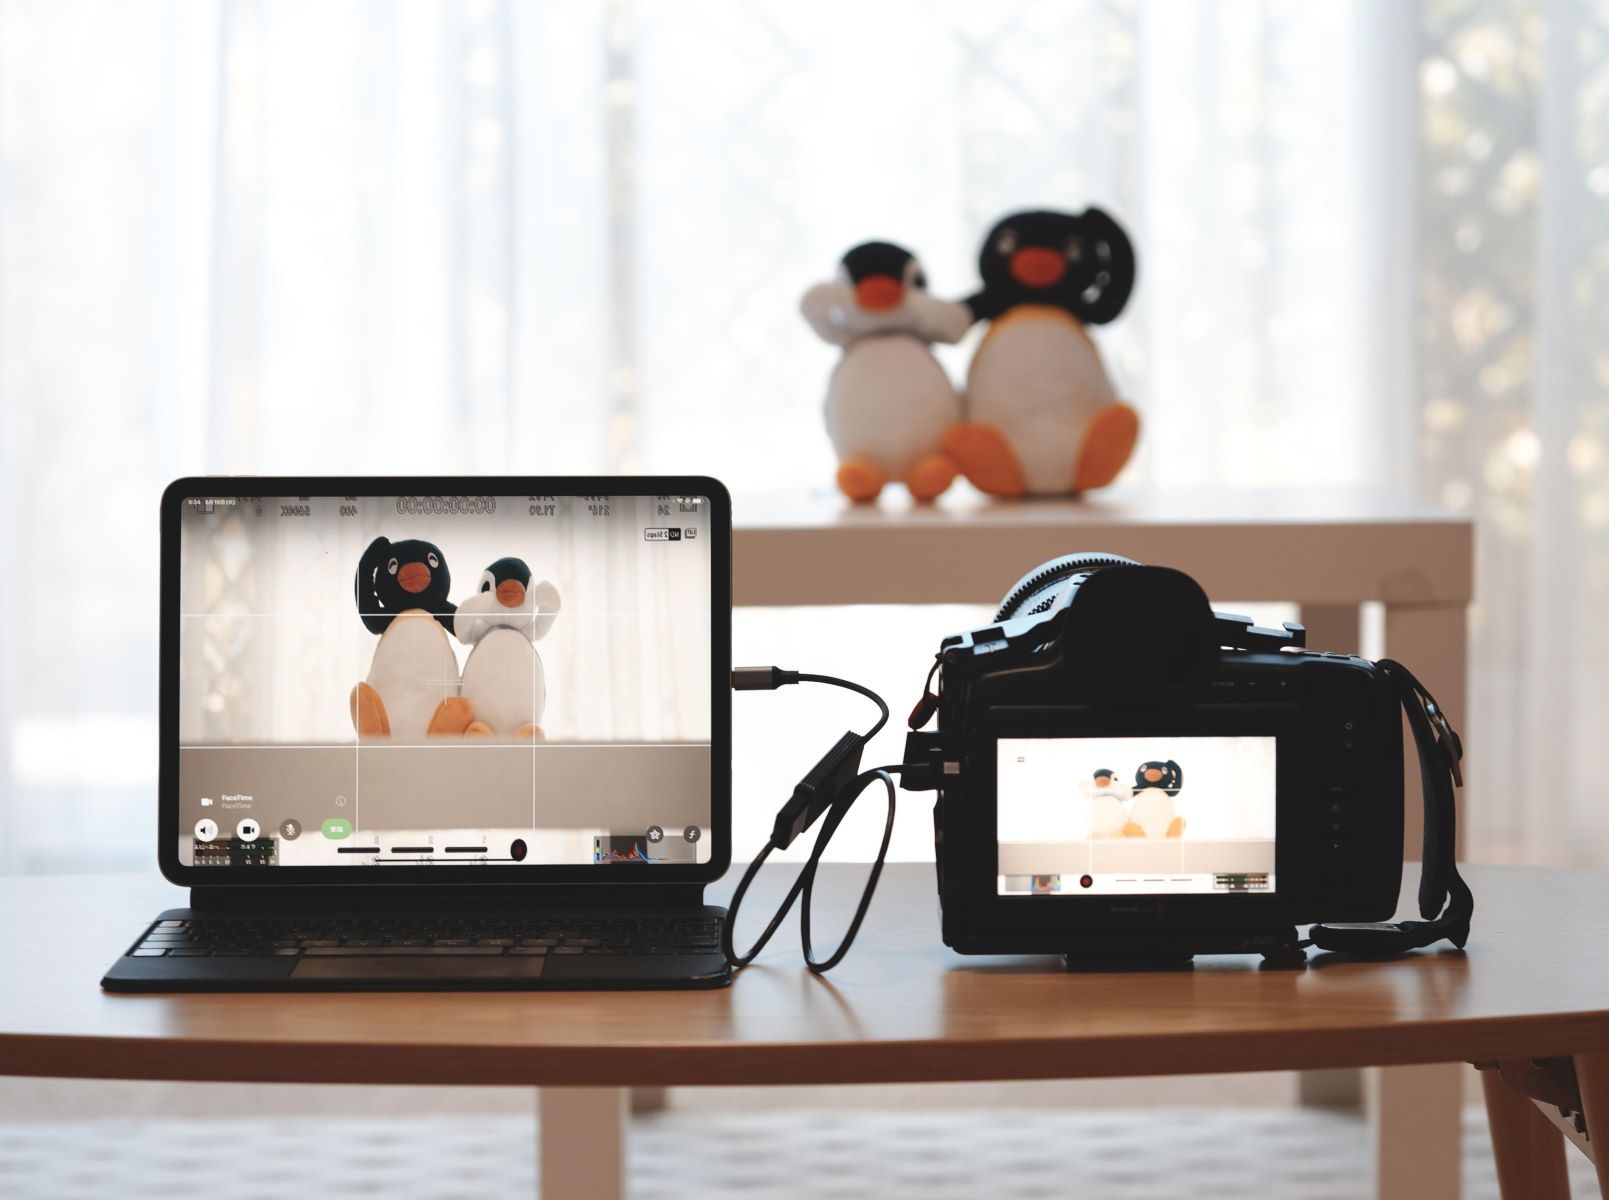 How To Use IPad As A Display For A DSLR Camera